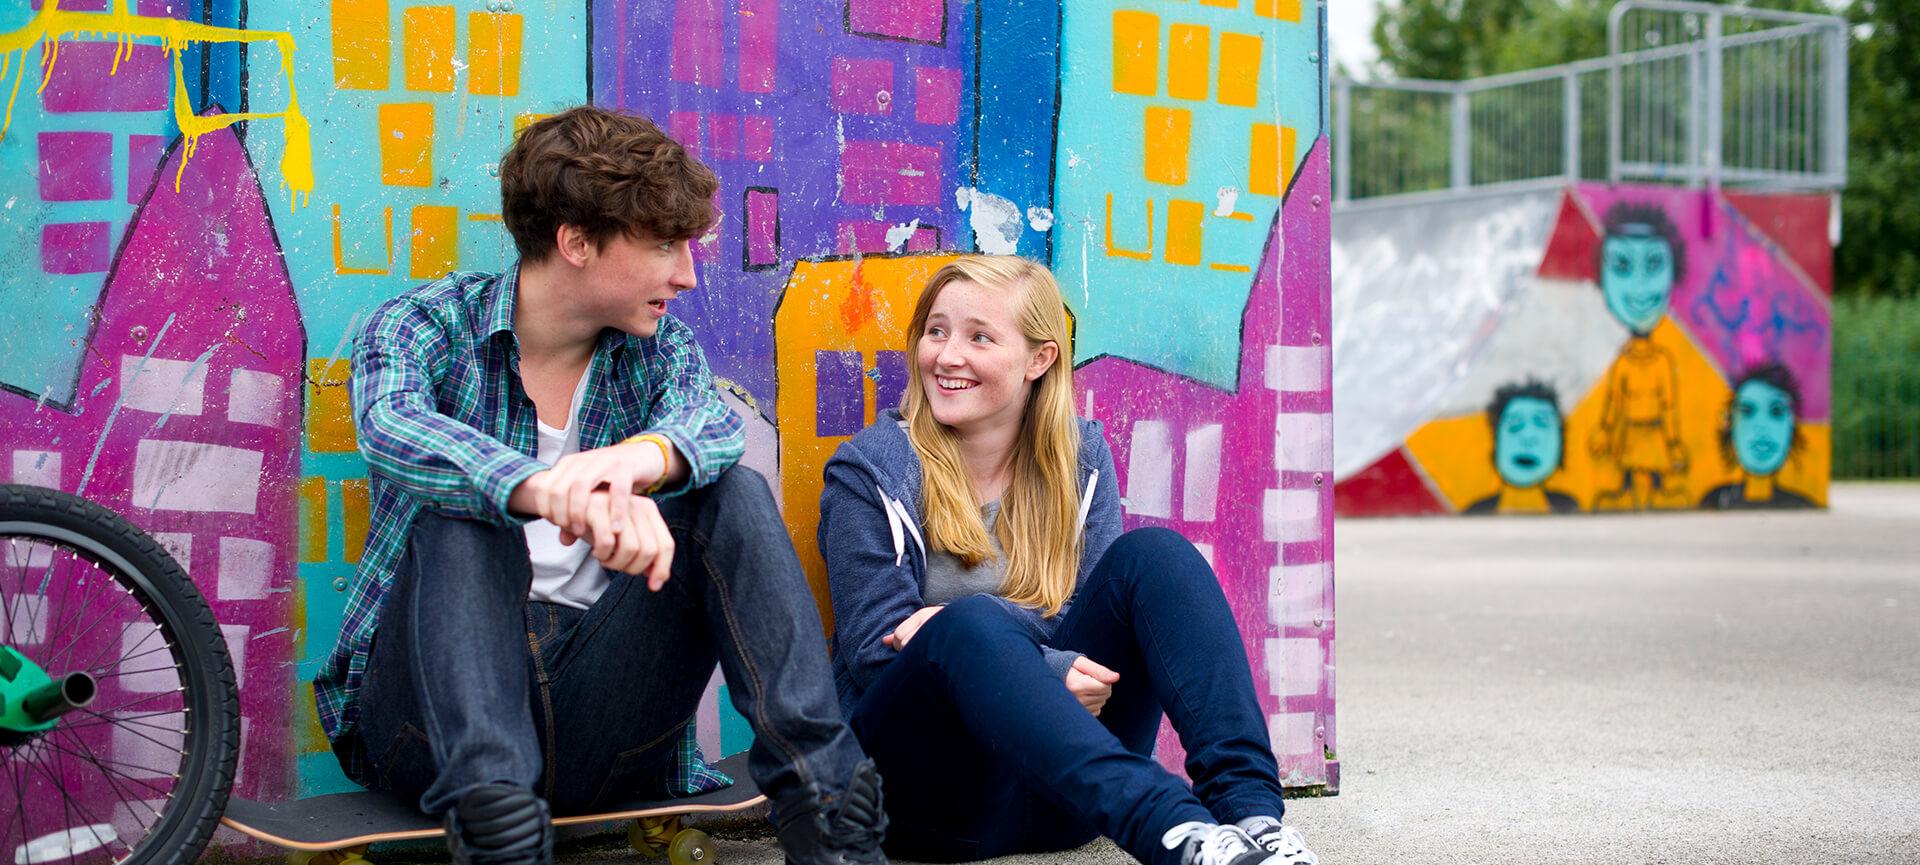 Two young people in front of graffiti wall